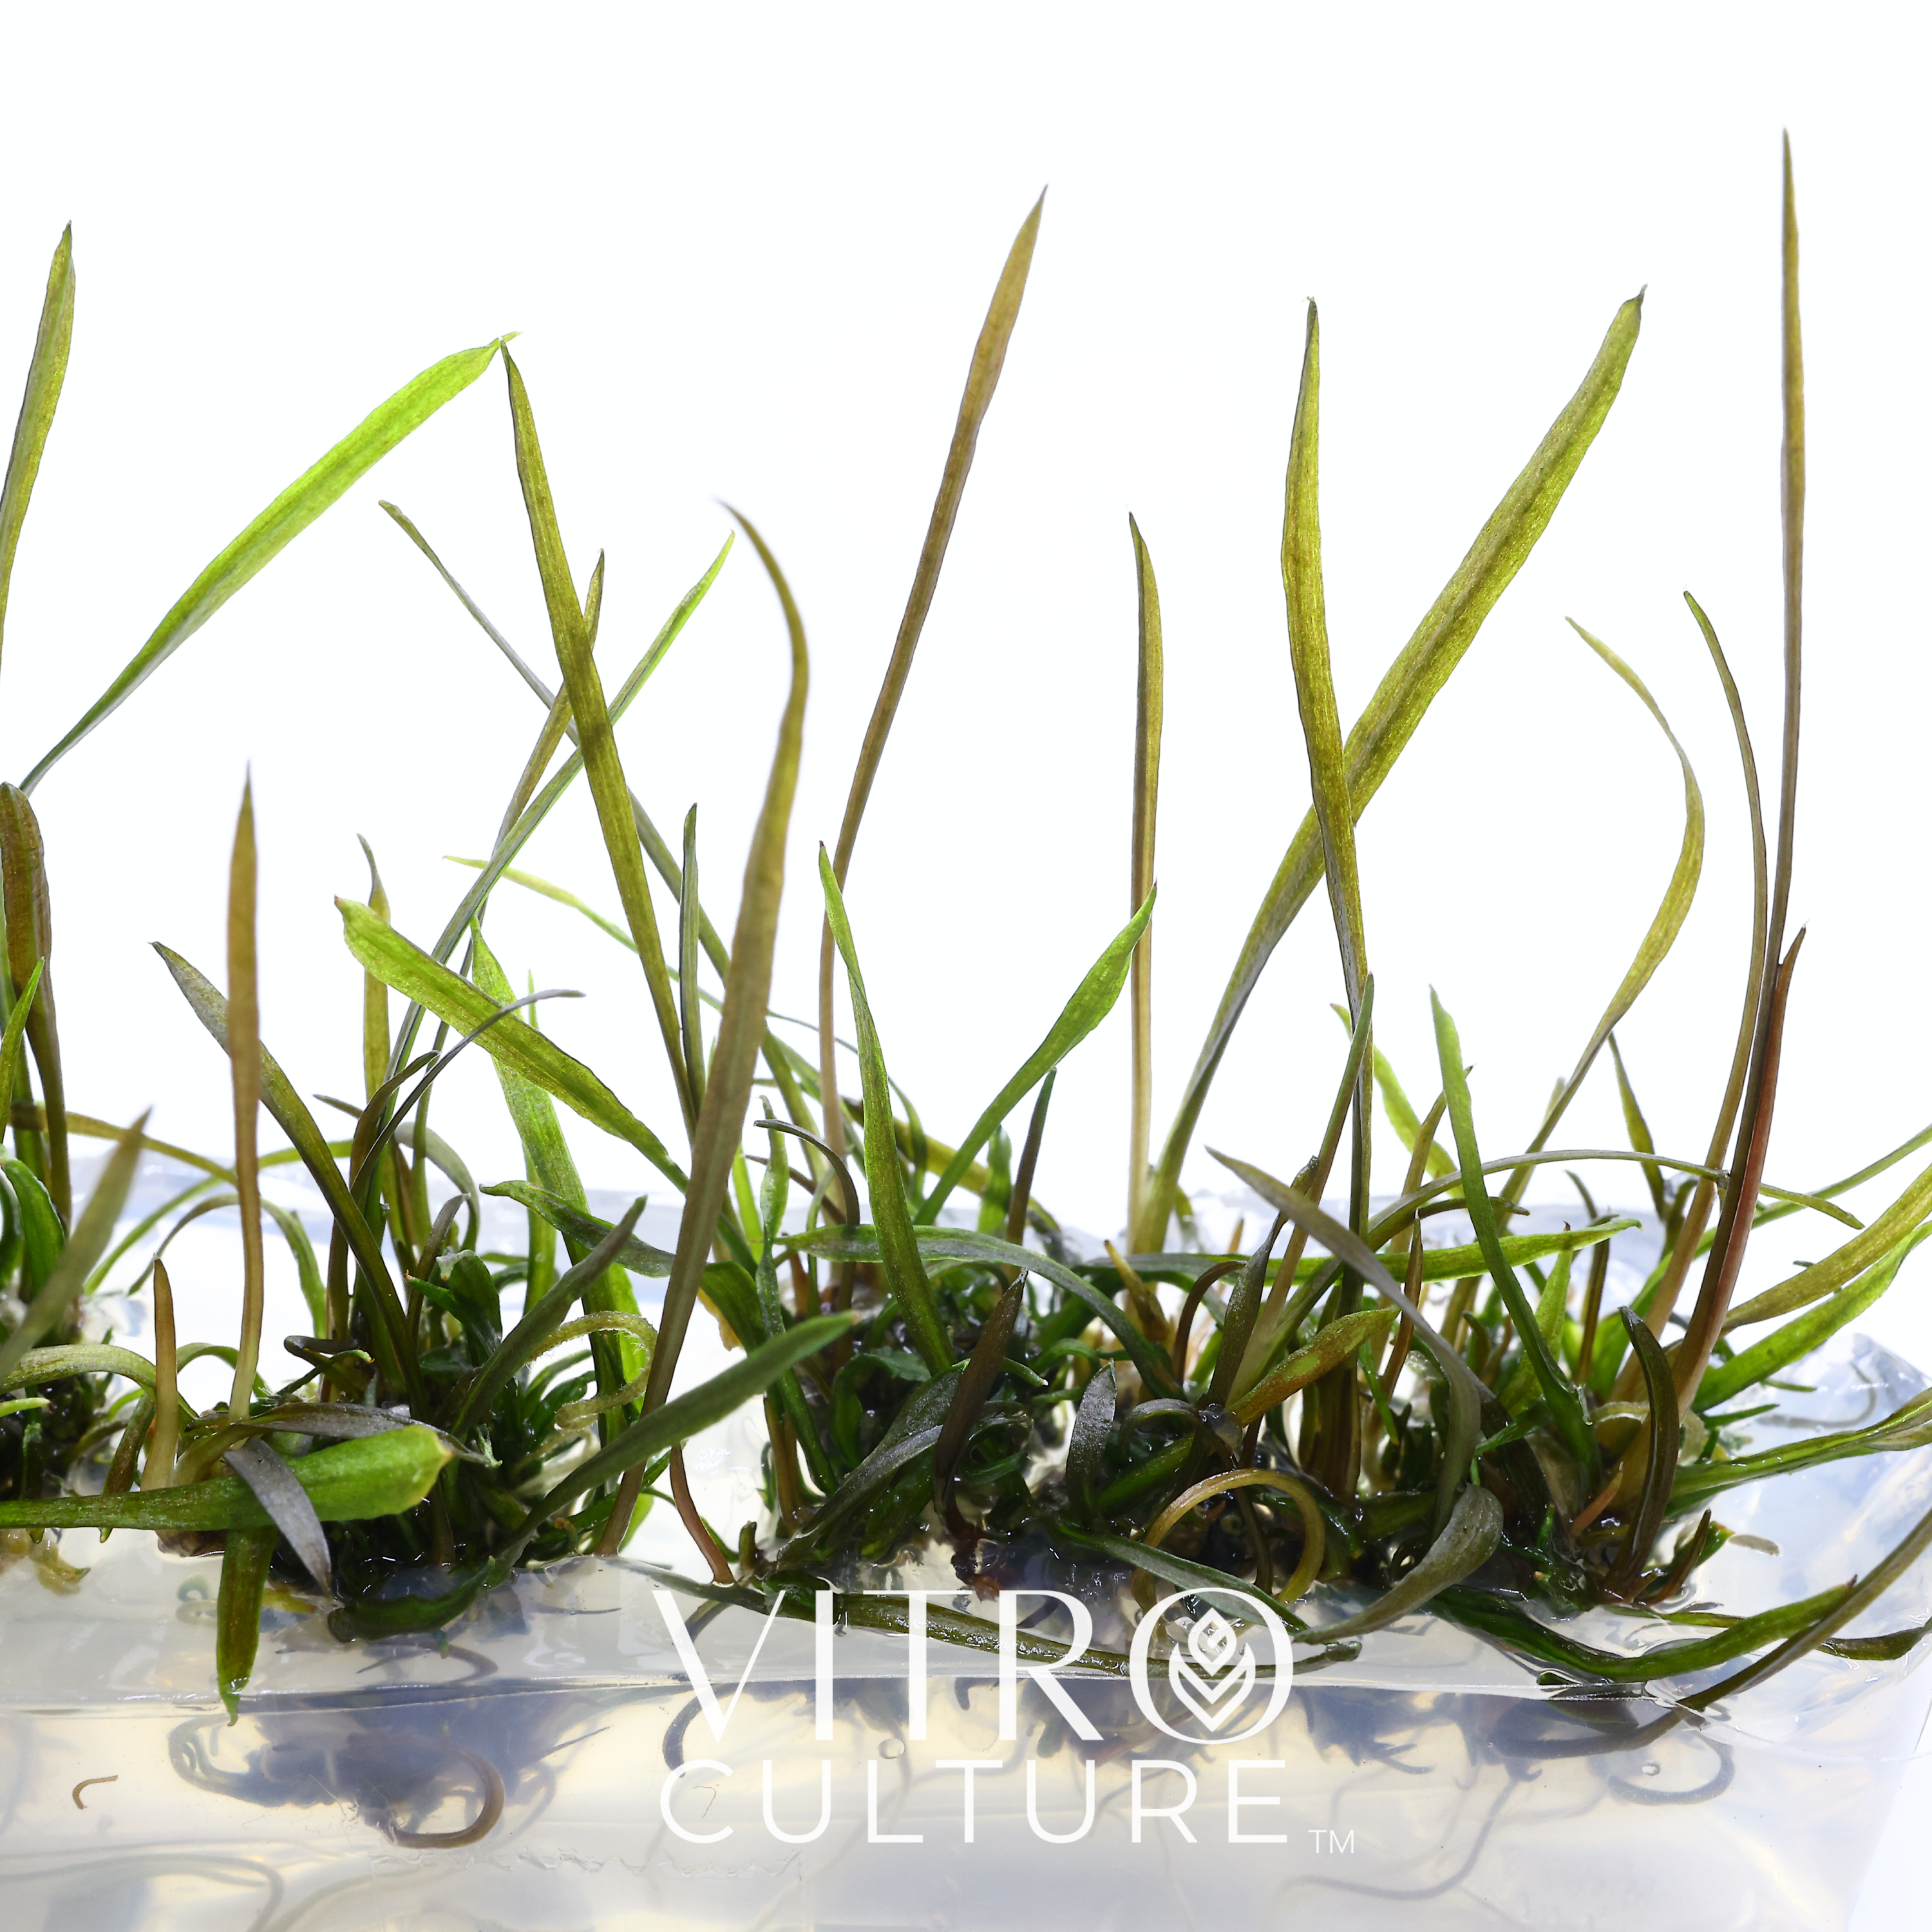 Cryptocoryne crispatula 'Tonkinensis' serves several practical purposes in aquariums. It can absorb excess nutrients and offer shelter for aquatic inhabitants, helping to maintain a healthy and balanced aquatic ecosystem.